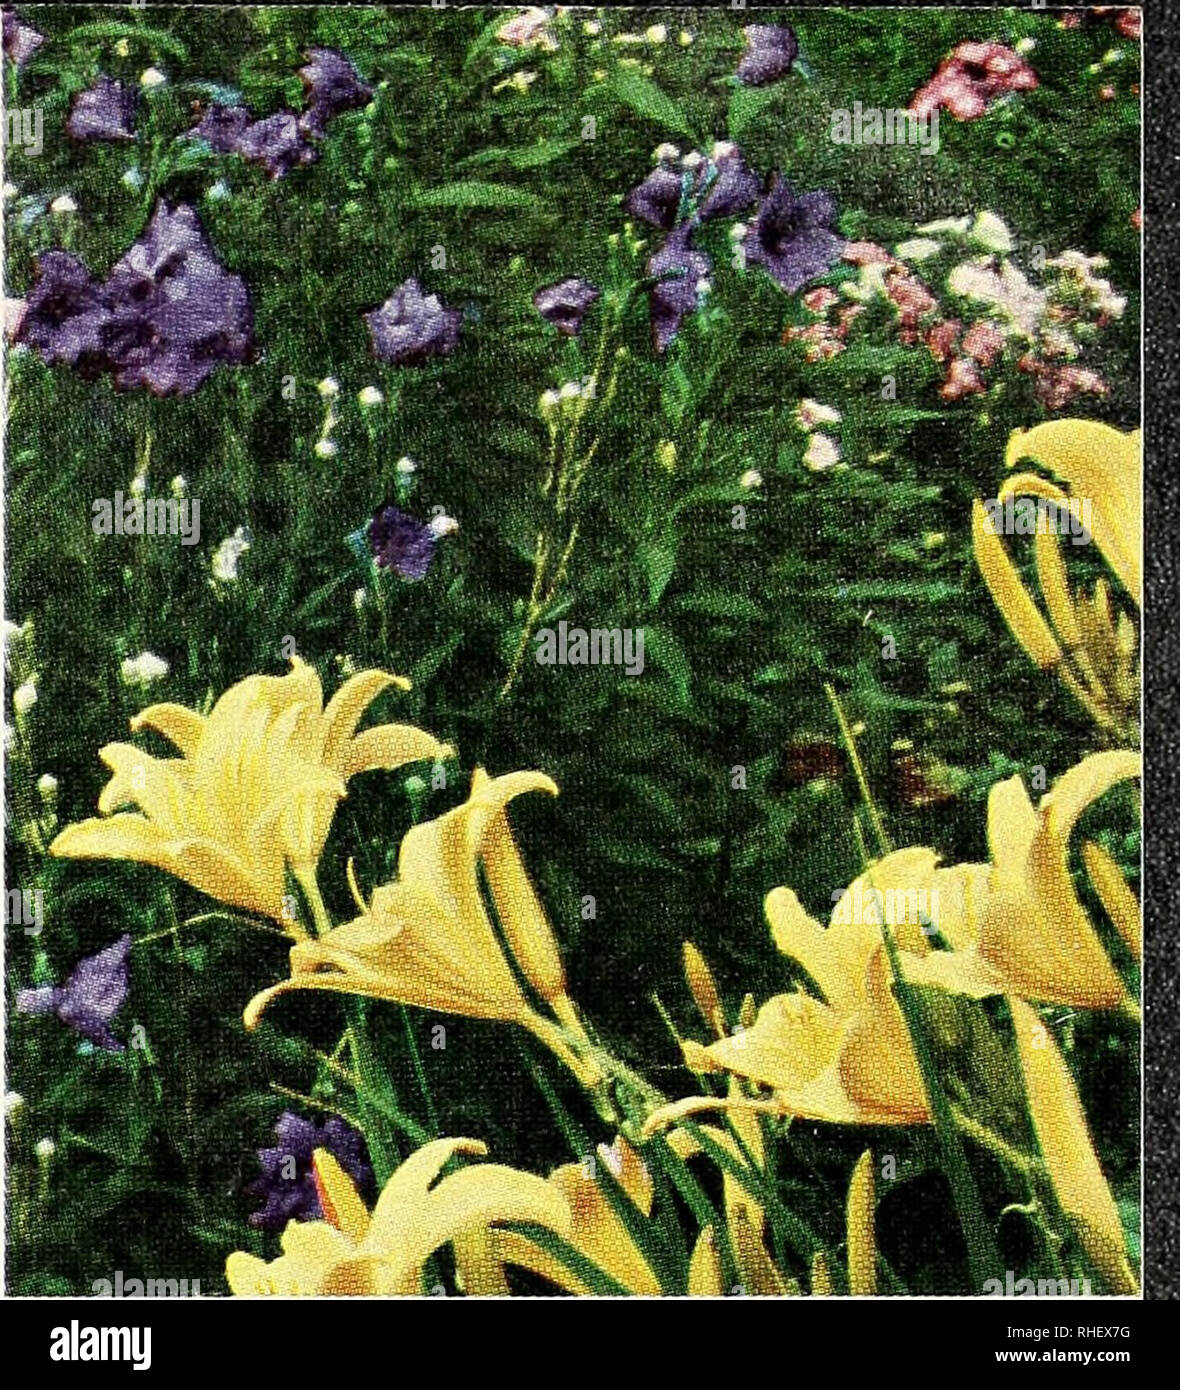 . Bolgiano's fall 1968. Nurseries (Horticulture) Catalogs; Bulbs (Plants) Catalogs; Seeds Catalogs; Trees Catalogs. For Fall Planting HELLEBORUS (Chriitm.s Rose) They grow best in rich soil and a shady location. Attractive the year round. Niger. 1 ft. Single white blooms flushed with pink on sturdy stems. December to March. $2.00 each; 3 for $5.50. Orientalis atrorubens. Crimson-purple flowers on 12 to 15-inch stems. February to April. $2.00 each; 3 for $5.50. IBERIS (Hardy Candytuft) Delightful little evergreen plants much used in rock gardens. They make splendid border plants, furnishing clo Stock Photo